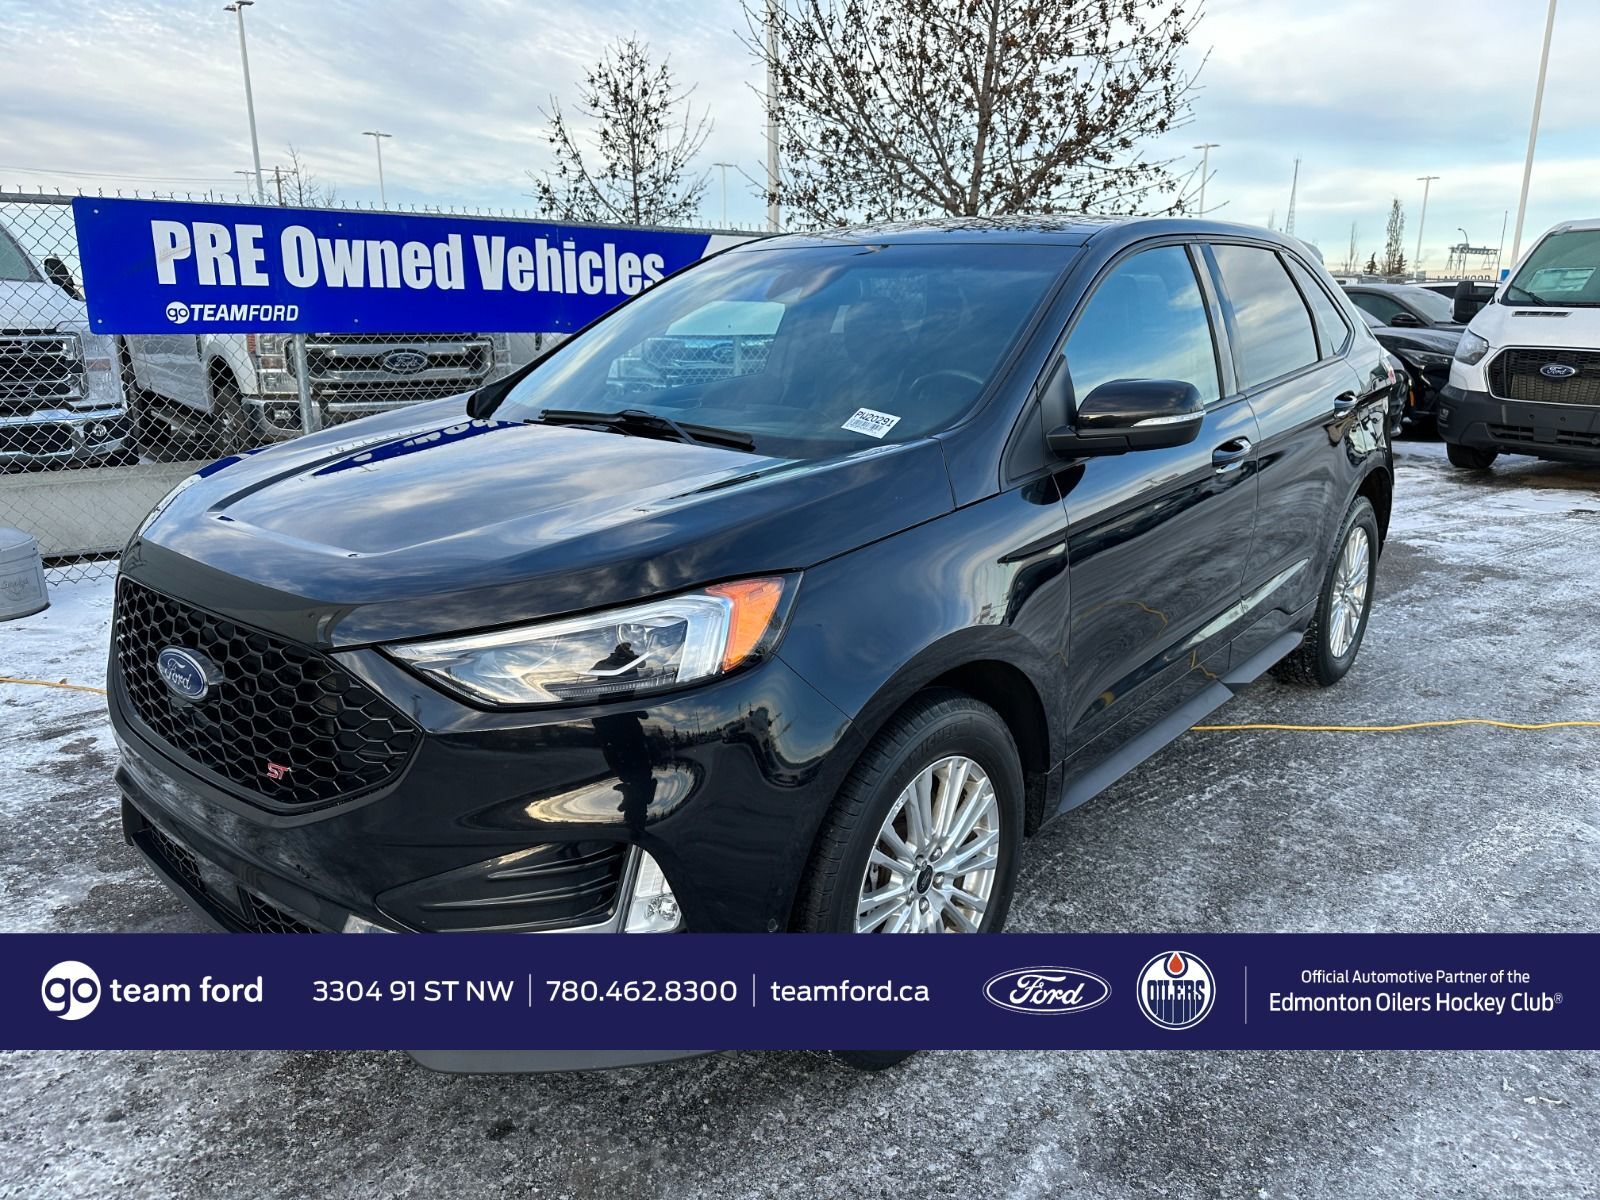 2020 Ford Edge 2.7L V6 ENG, ST, PANORAMIC ROOF, HEATED/COOLED SEA